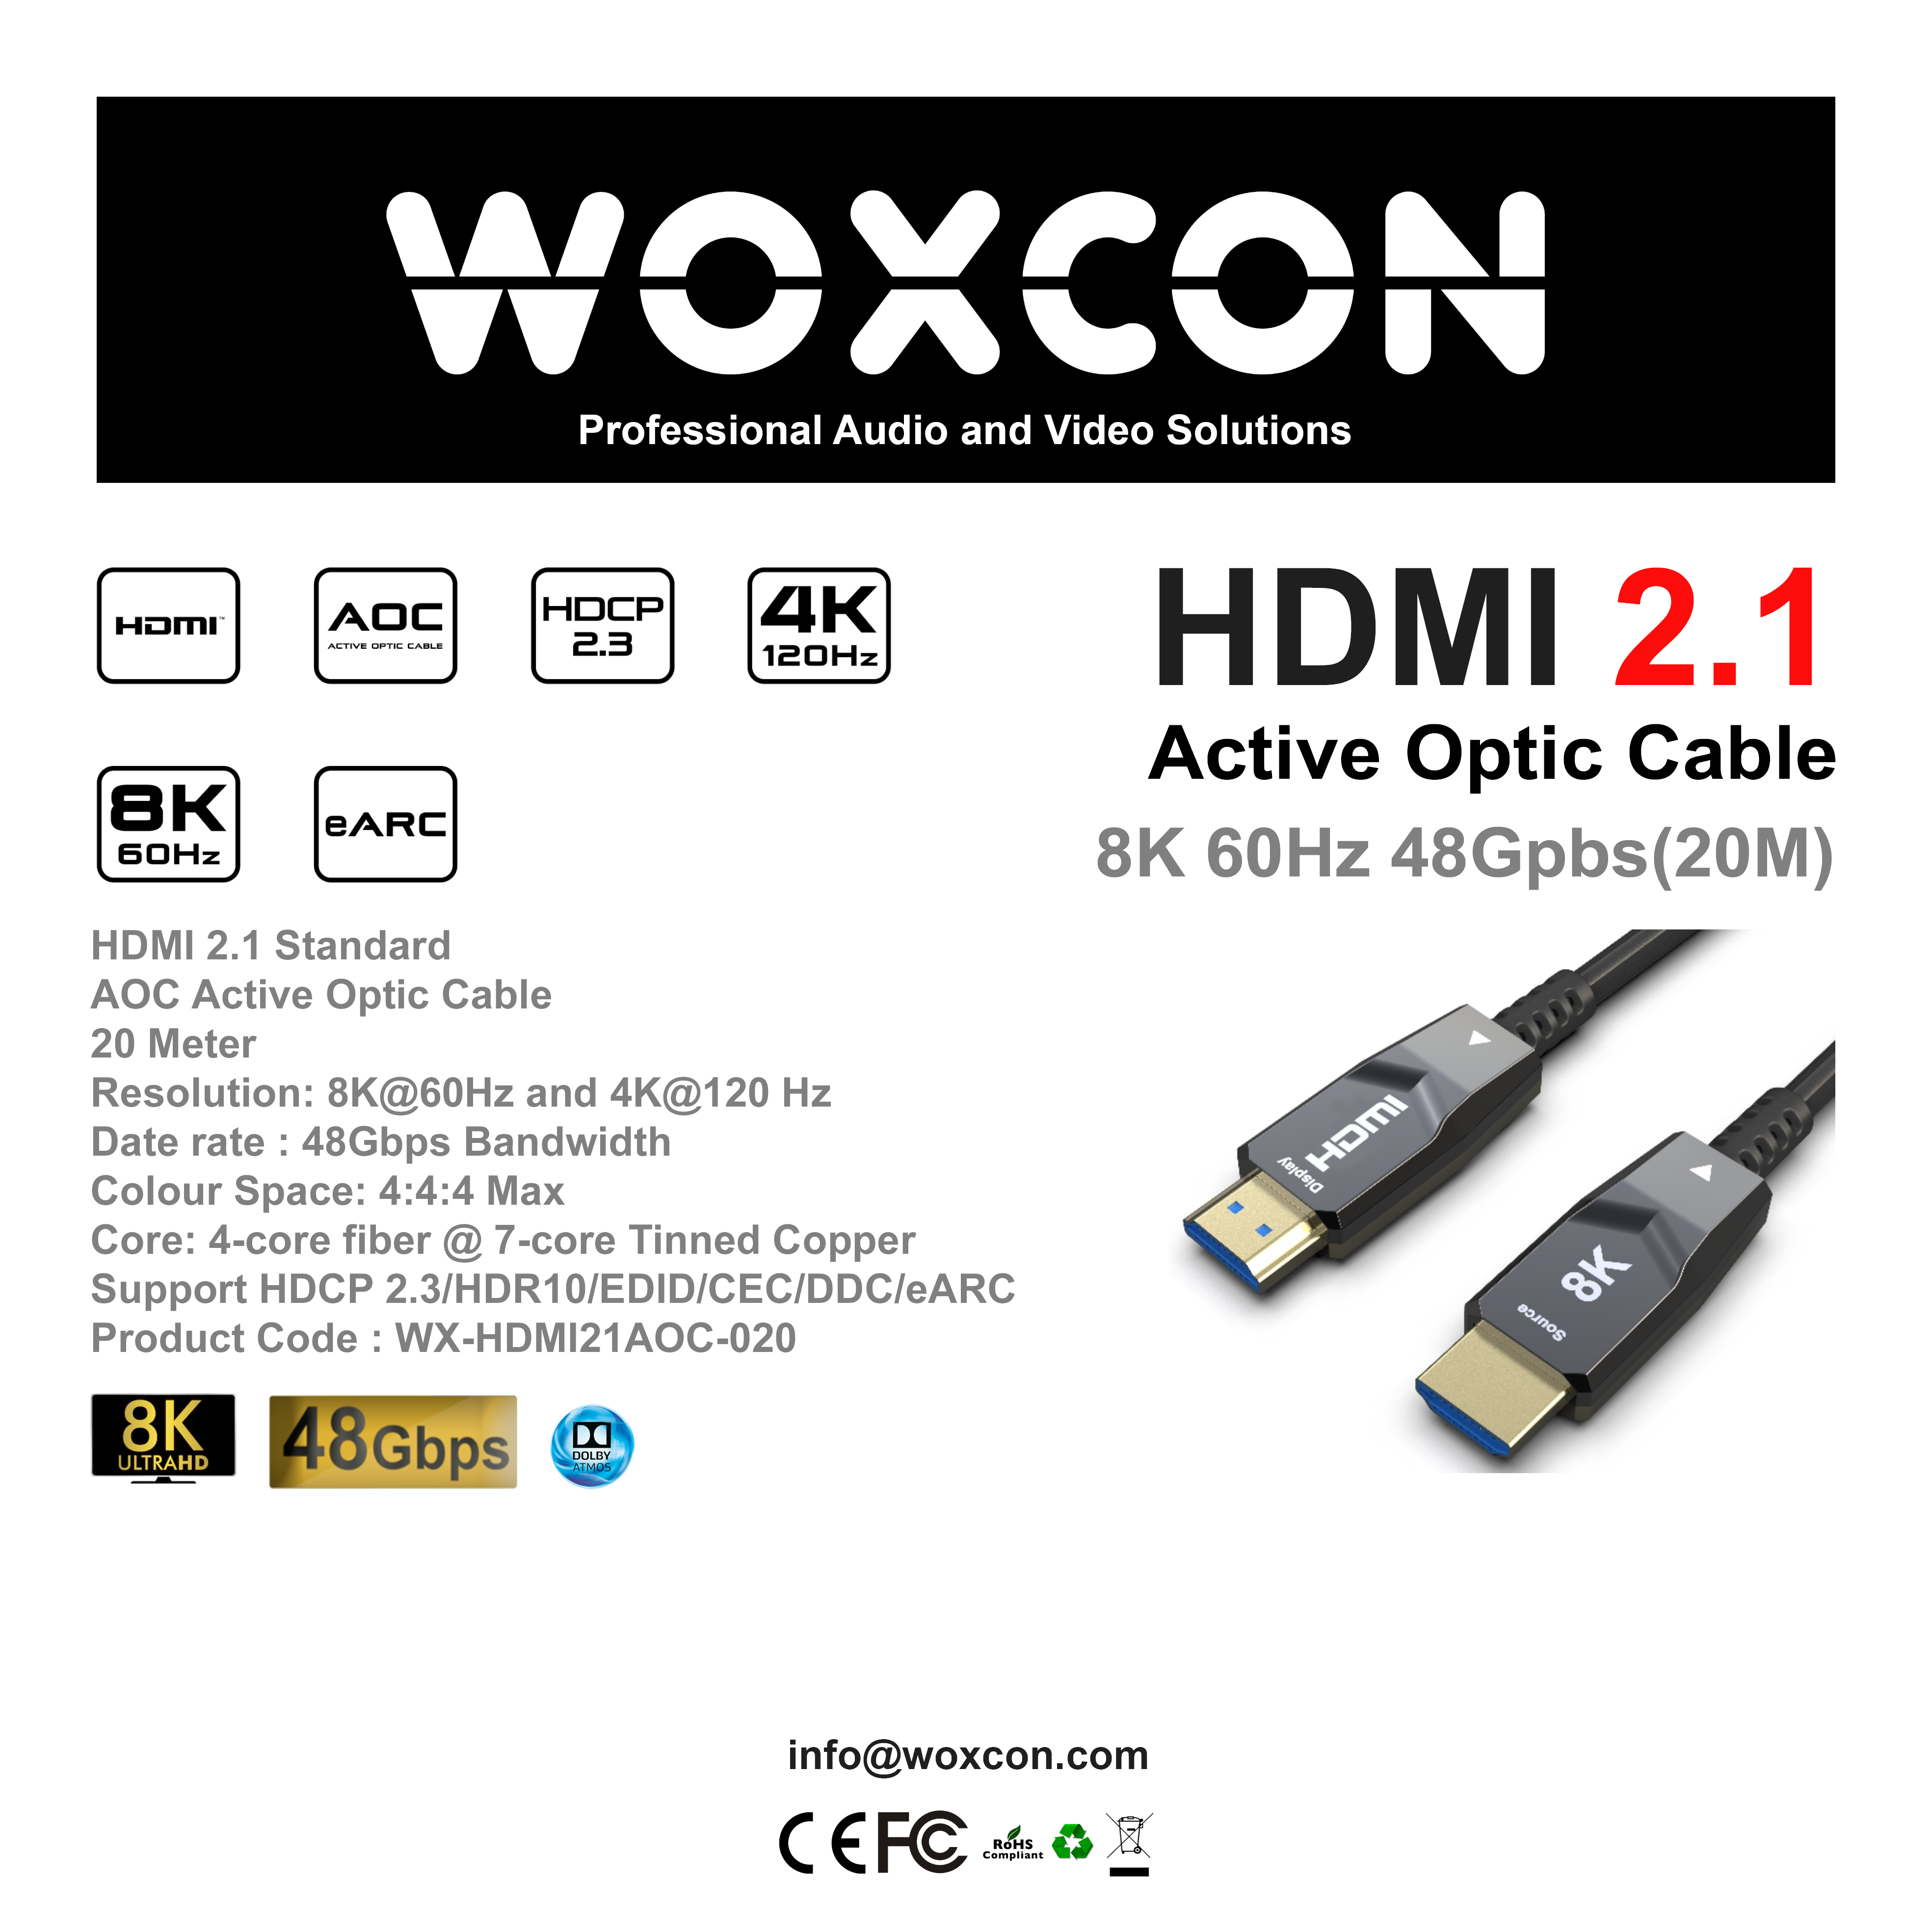 HDMI 2.1 Hybrid Active Optic Cable 8K supported 20 mt